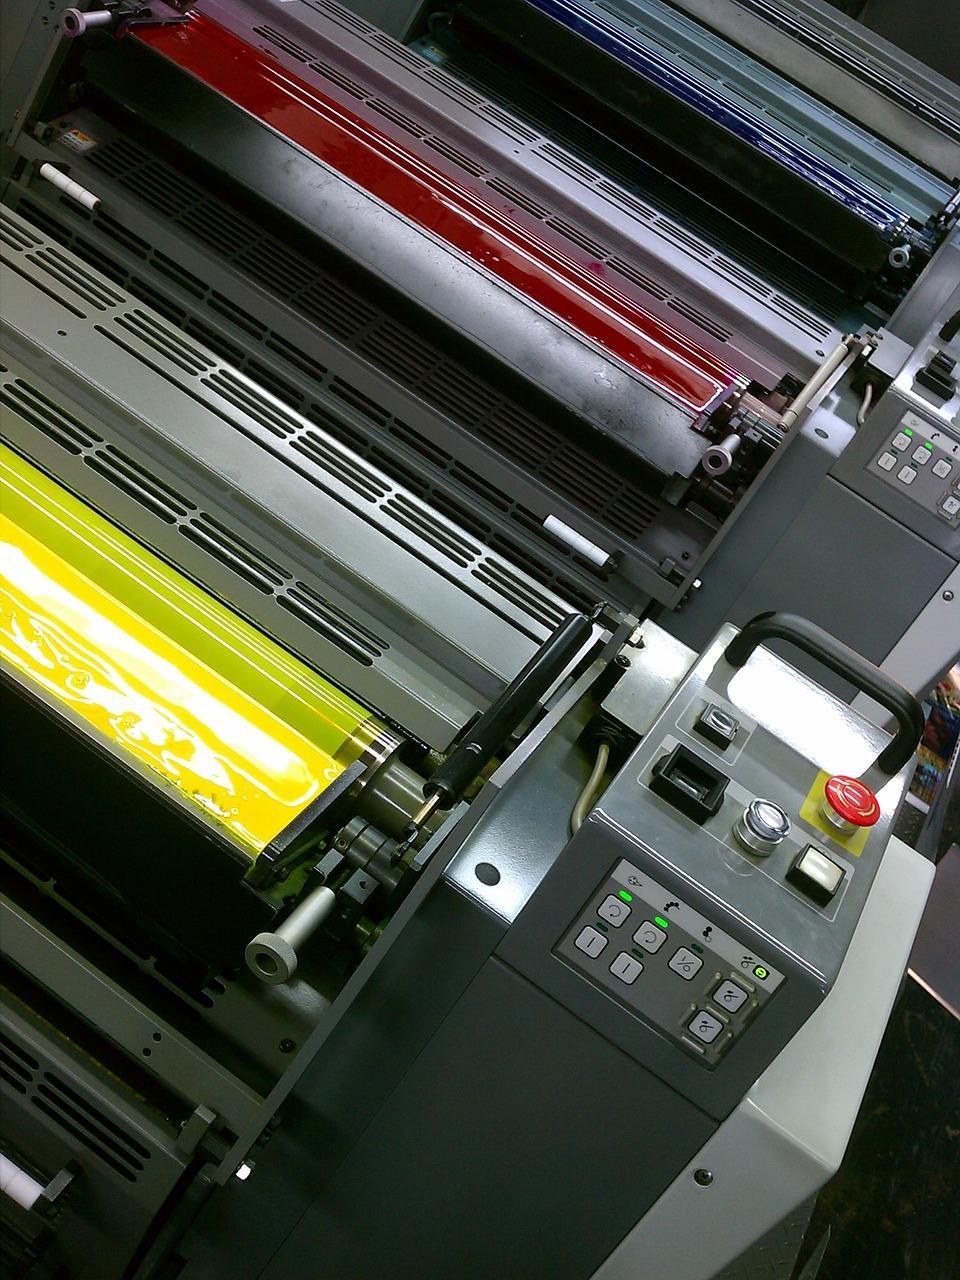 Offset Printing: this printing process utilizes etched metal plates that apply